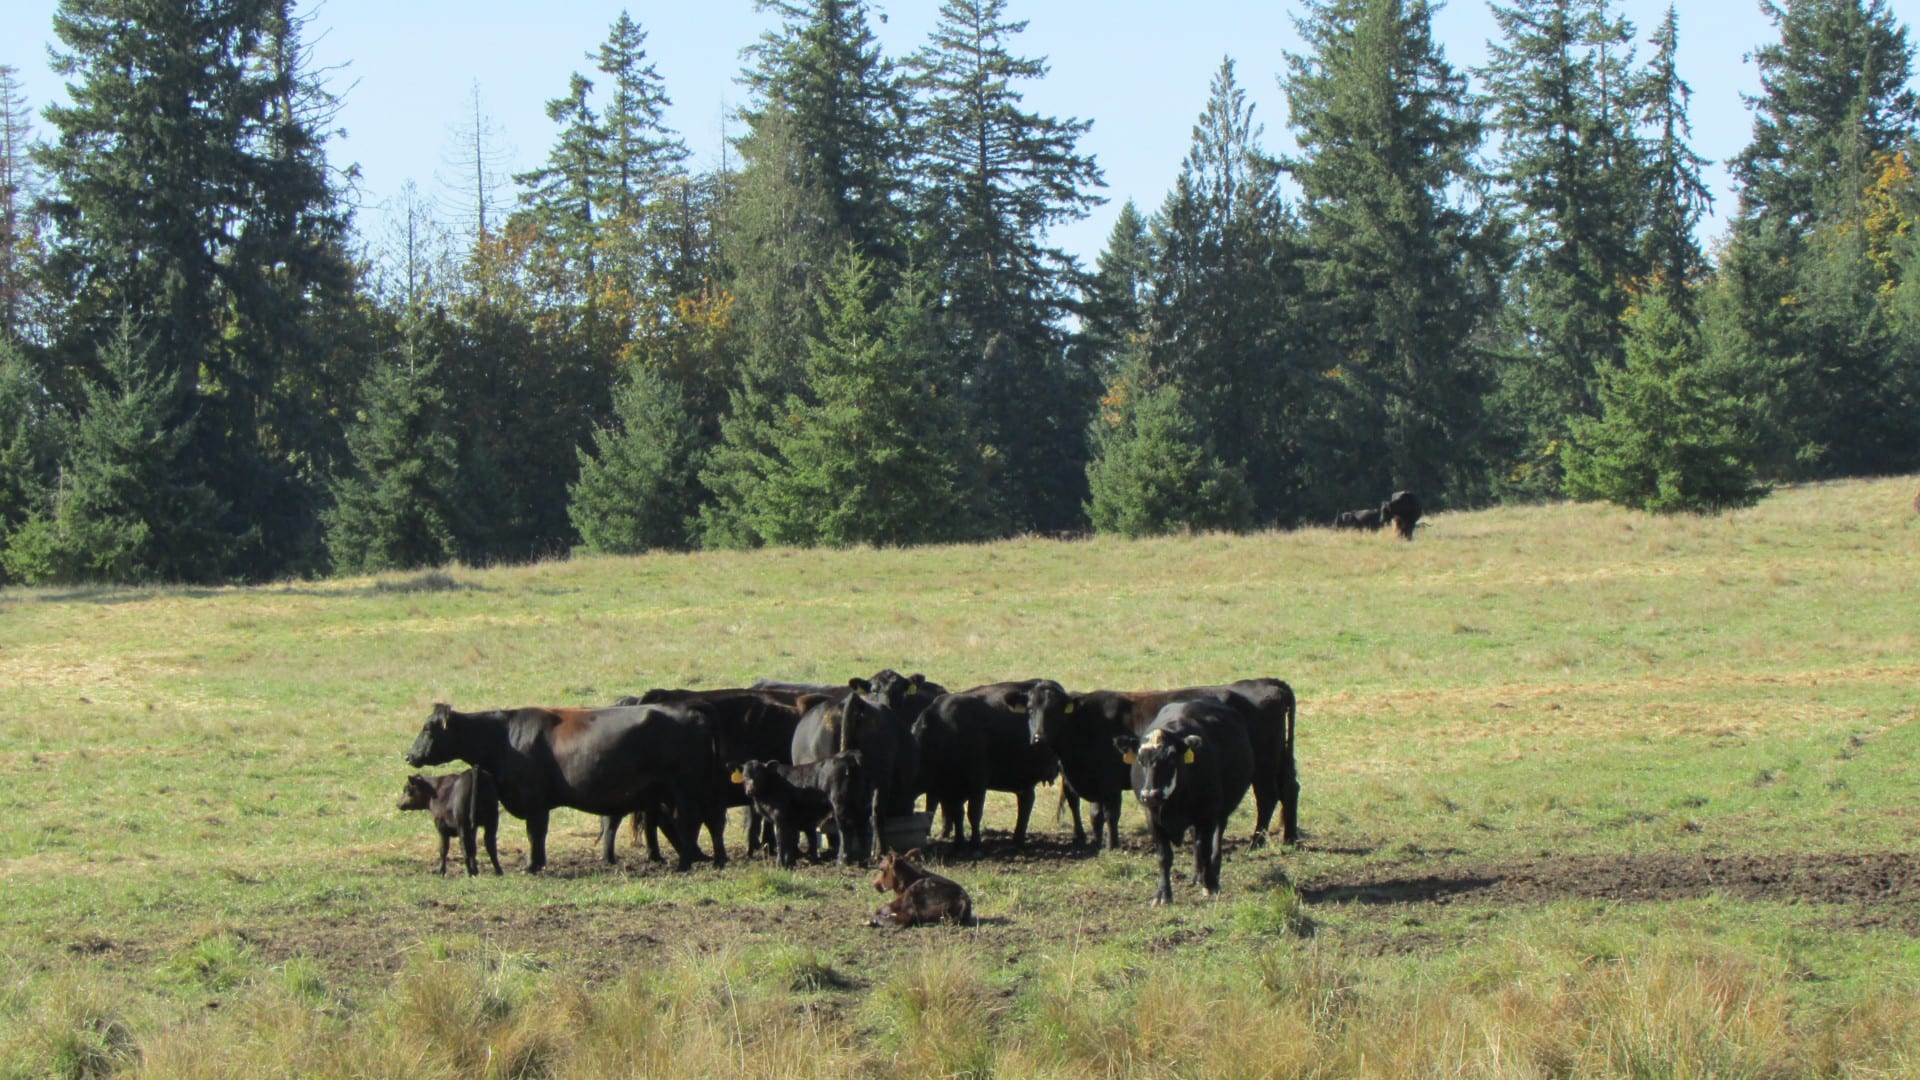 cattle on pasture washington t90 cattle ranch